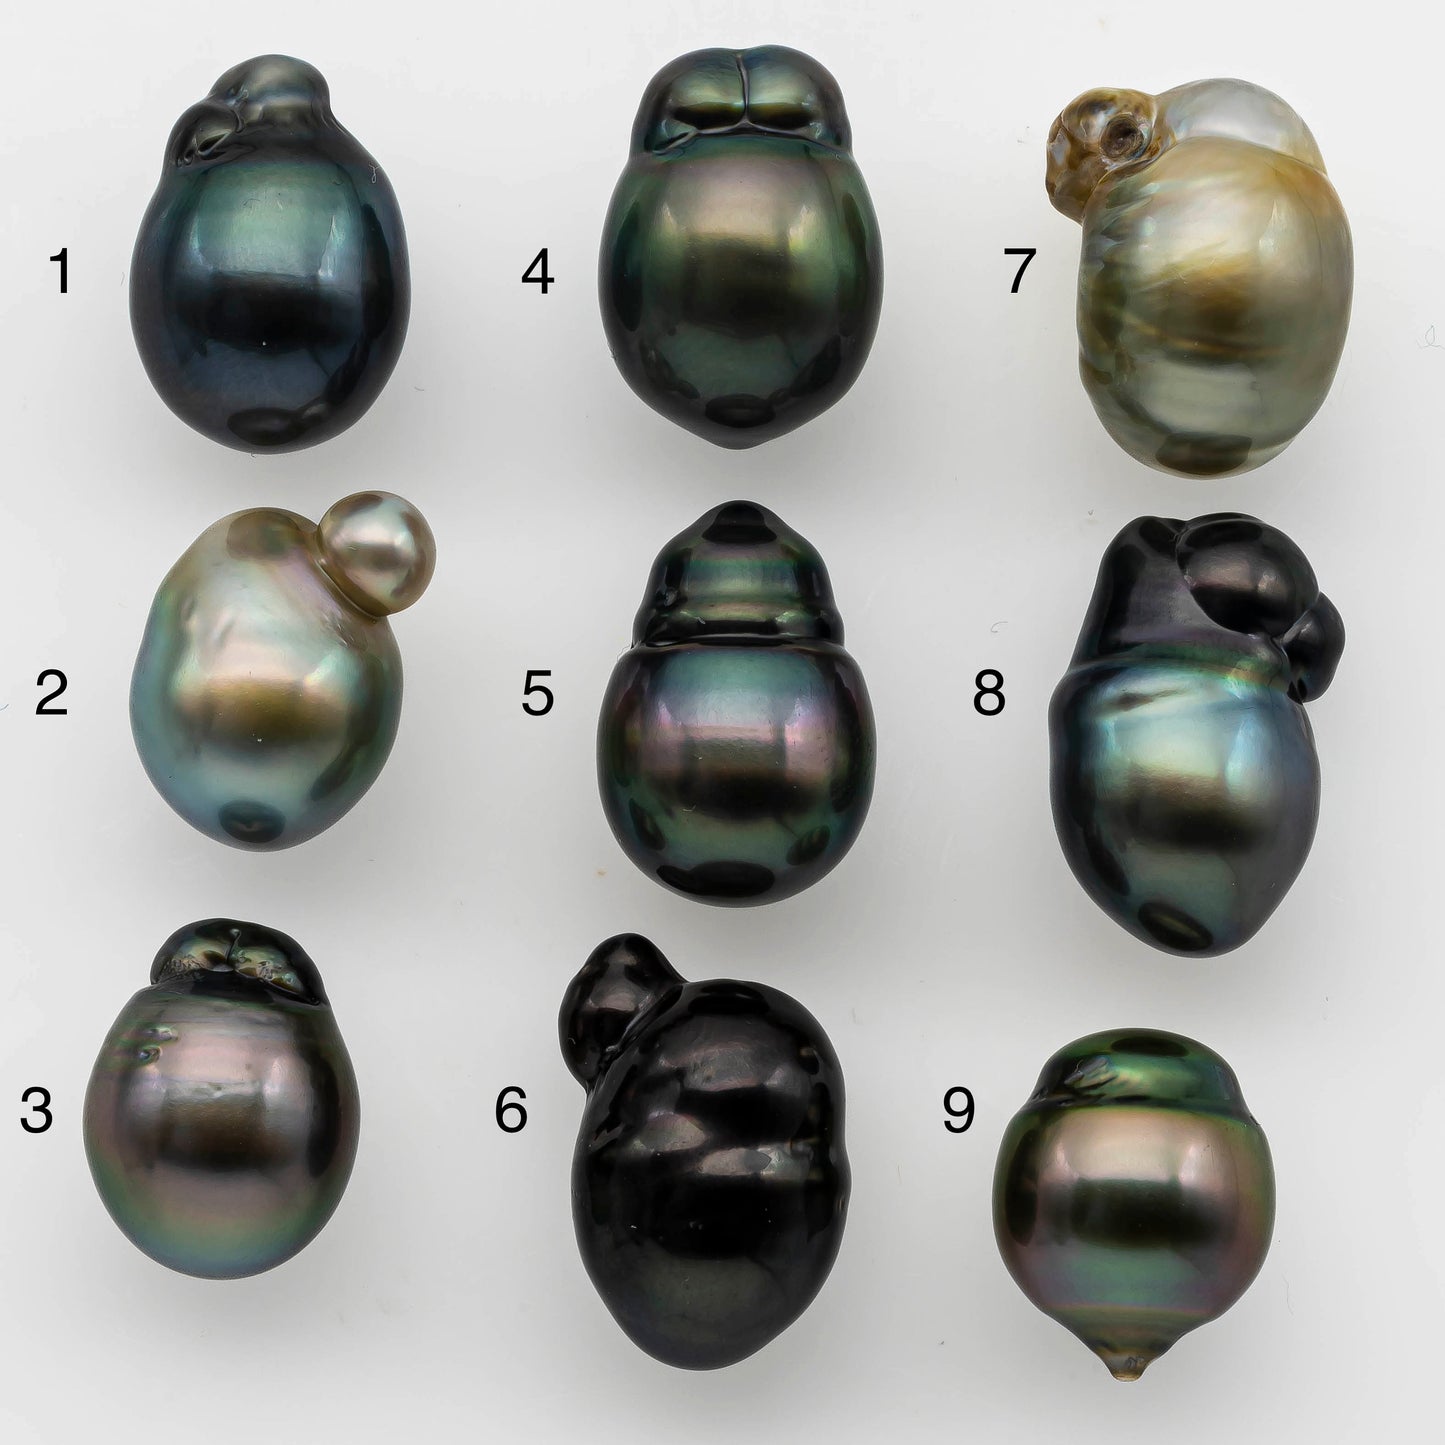 10-11mm Baroque Tahitian Pearl Drops Undrilled Loose Single Piece in High Luster and Natural Color with Blemishes, SKU # 1490TH